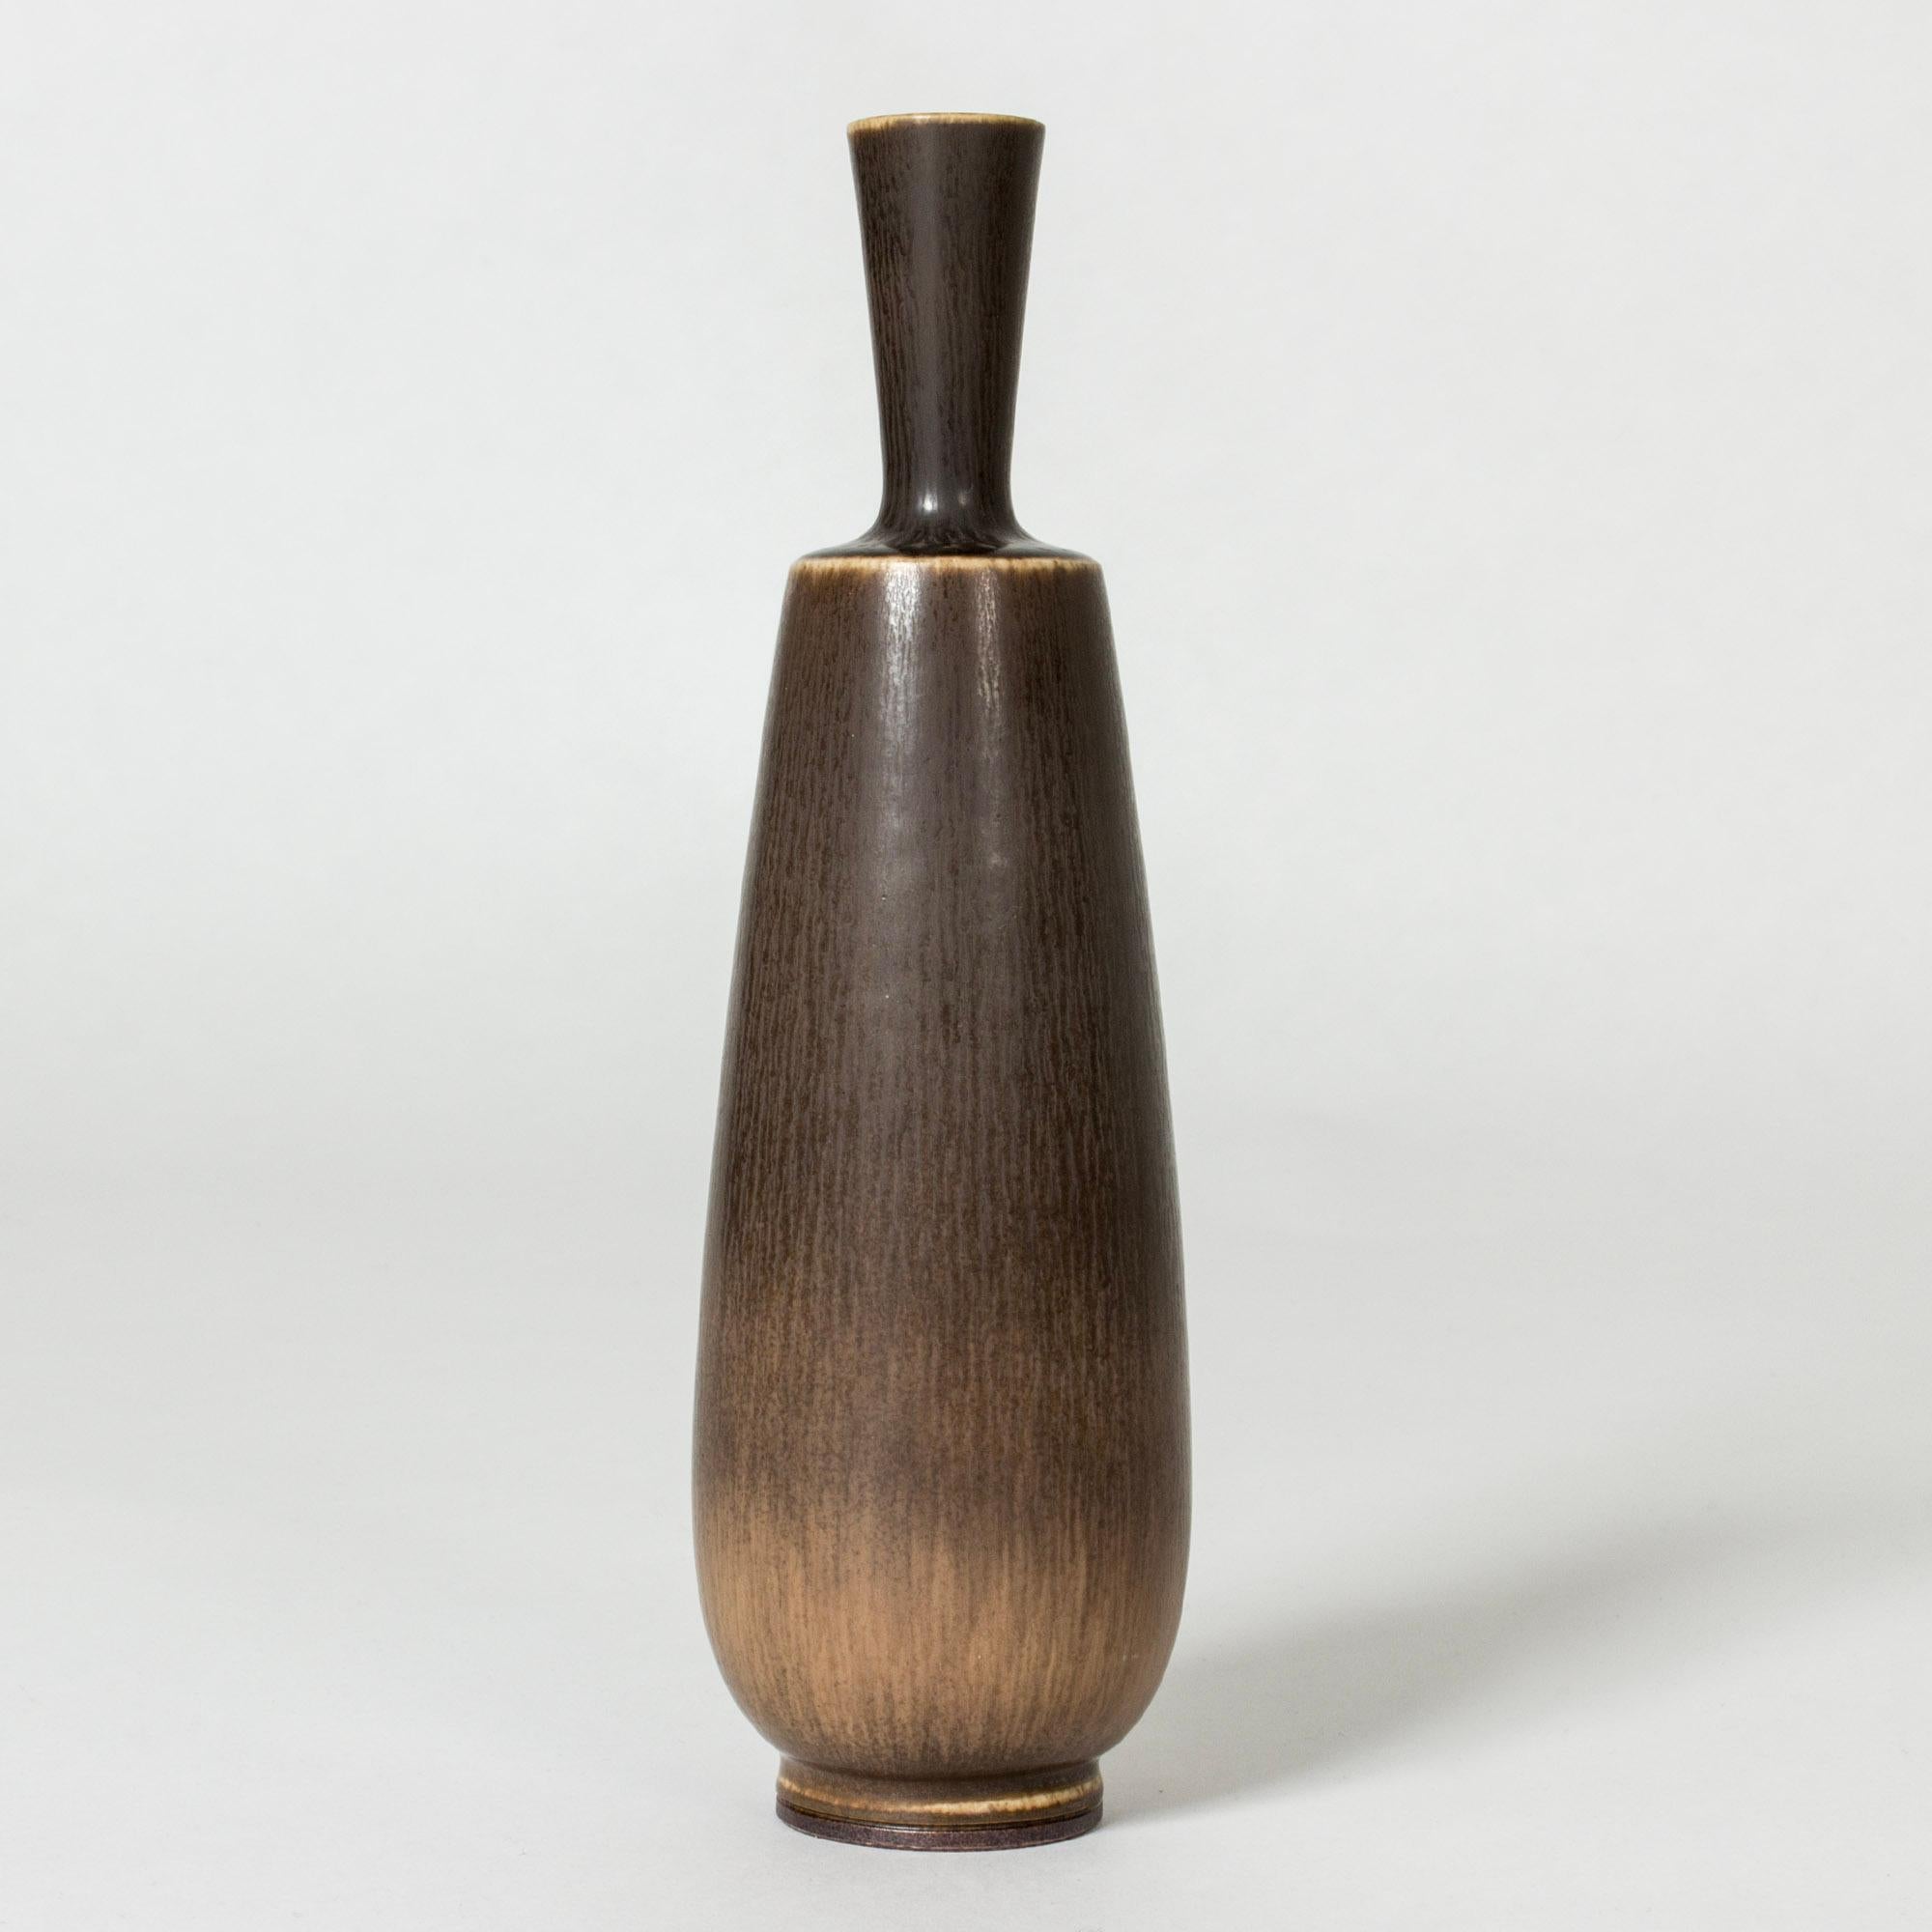 Stoneware vase by Berndt Friberg in an elegant shape with both plumpness and strictness. Rich dark brown hare’s fur glaze.

Berndt Friberg was a Swedish ceramicist, renowned for his stoneware vases and vessels for Gustavsberg. His pure, composed